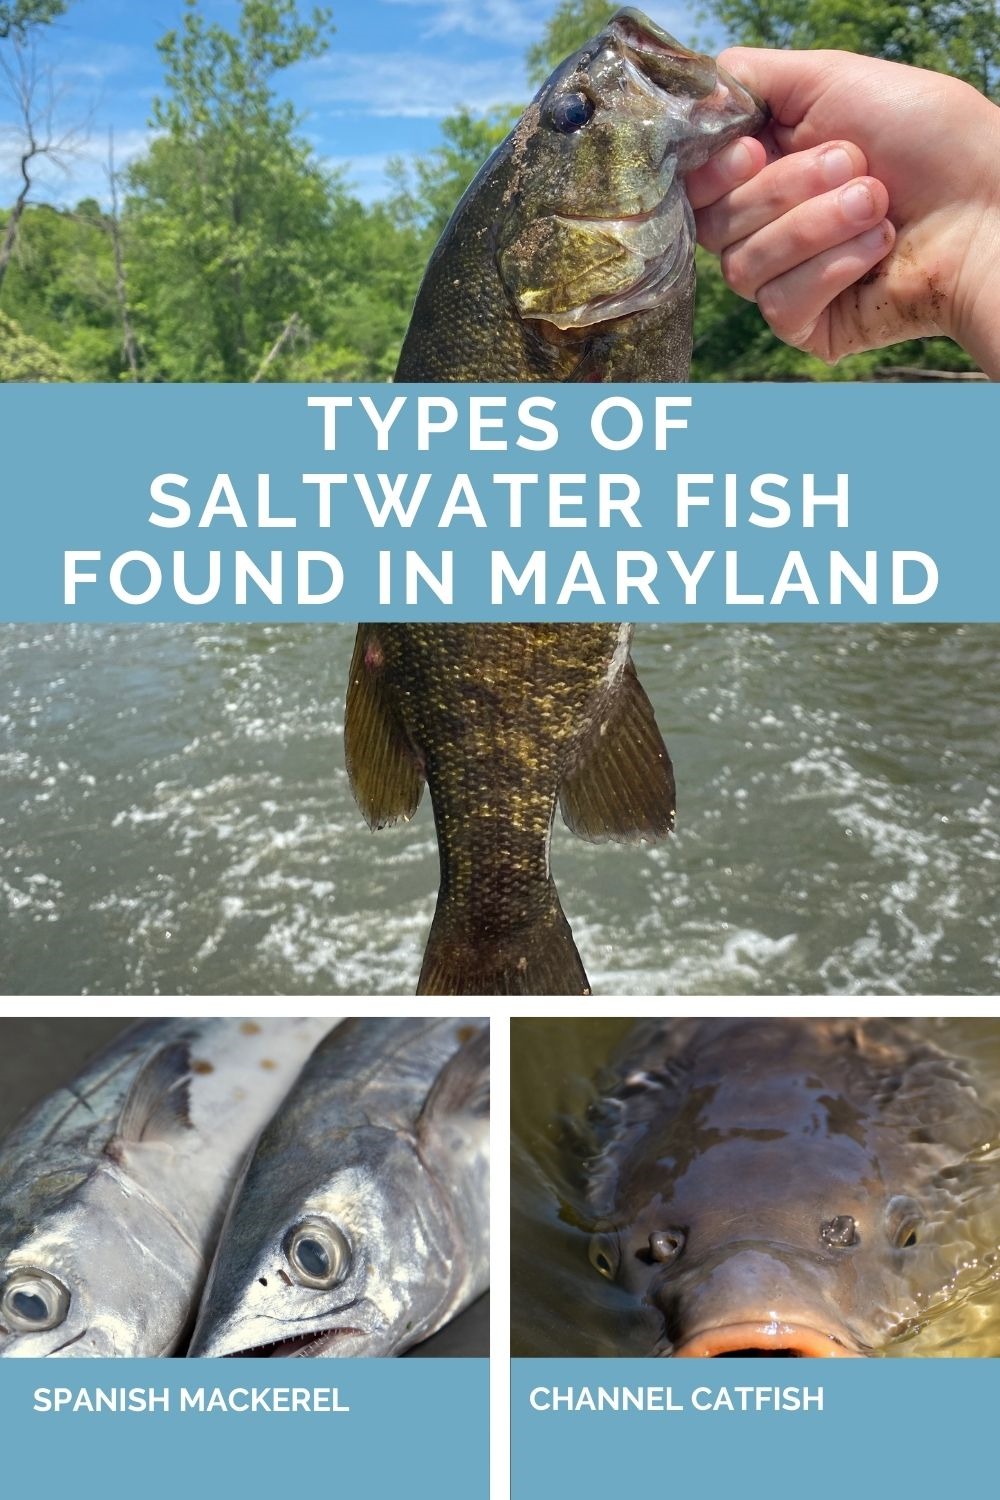 Types of Saltwater Fish Found in Maryland